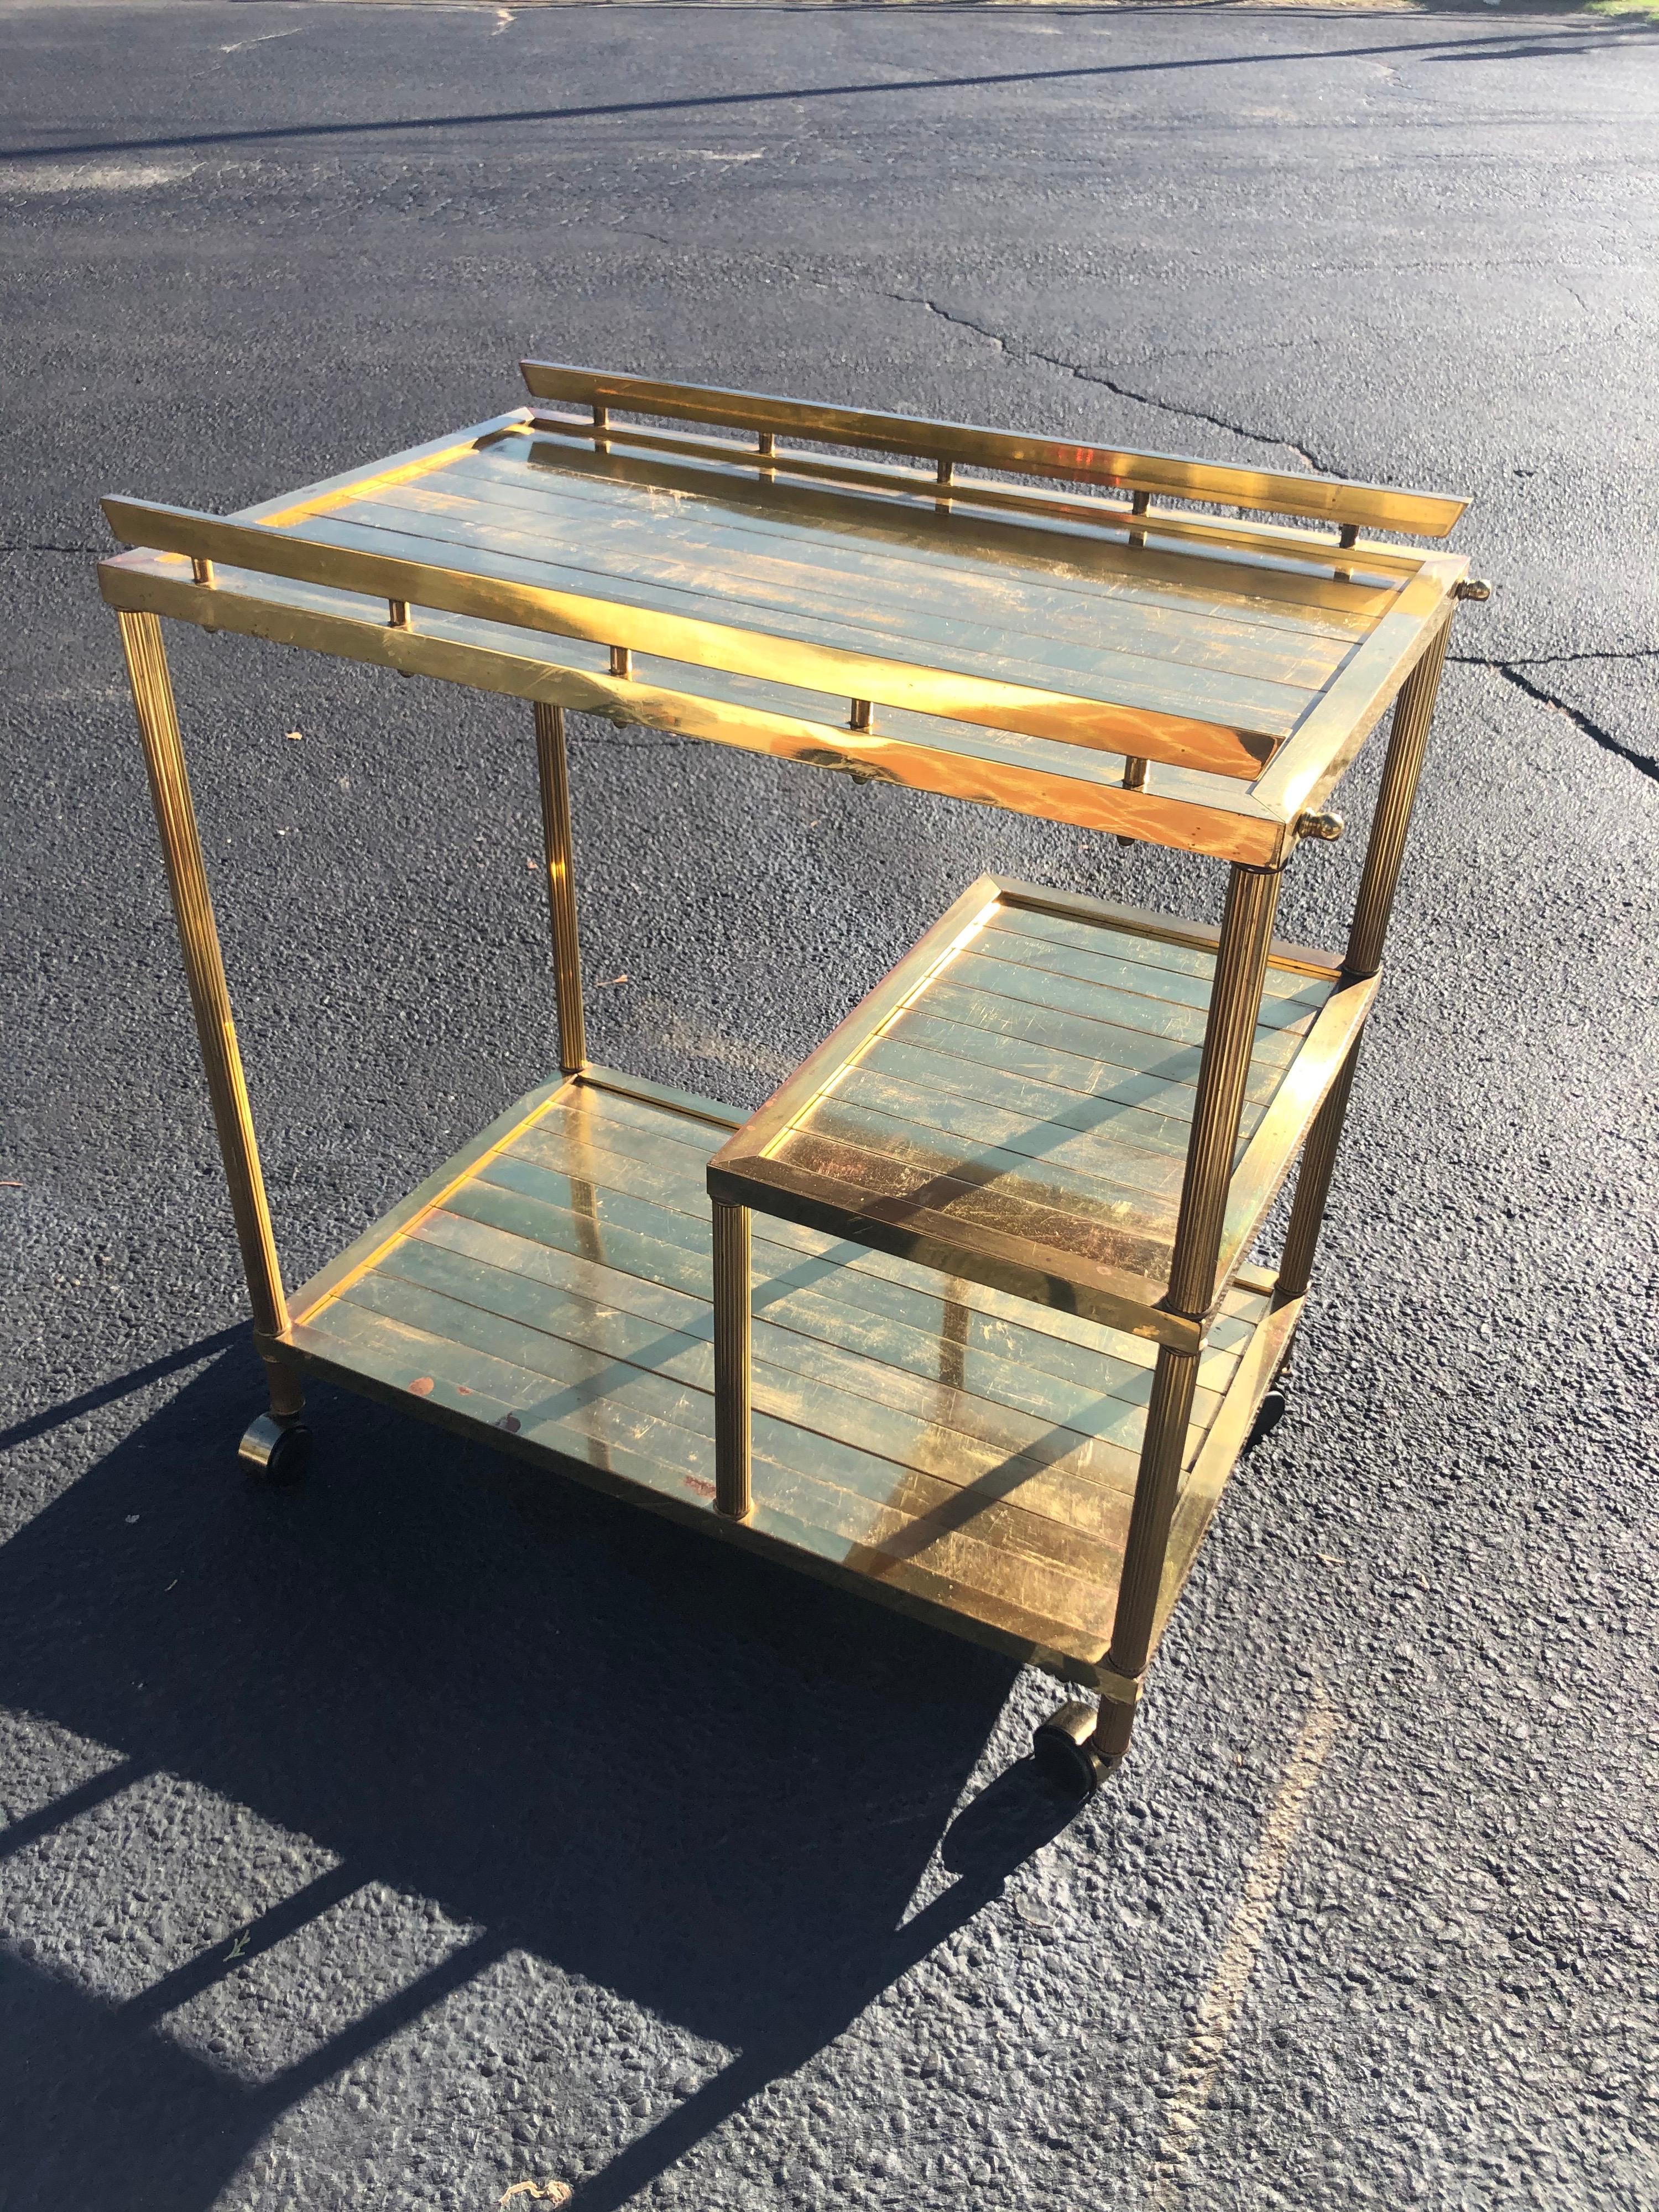 Hollywood Regency brass bar cart. Custom made in the 1970s by a brass importer of Italy. Three shelves. Constructed of brass bars in formation. Heavy weight. Not recommended for rolling around as one wheel does not articulate well. Trying to replace